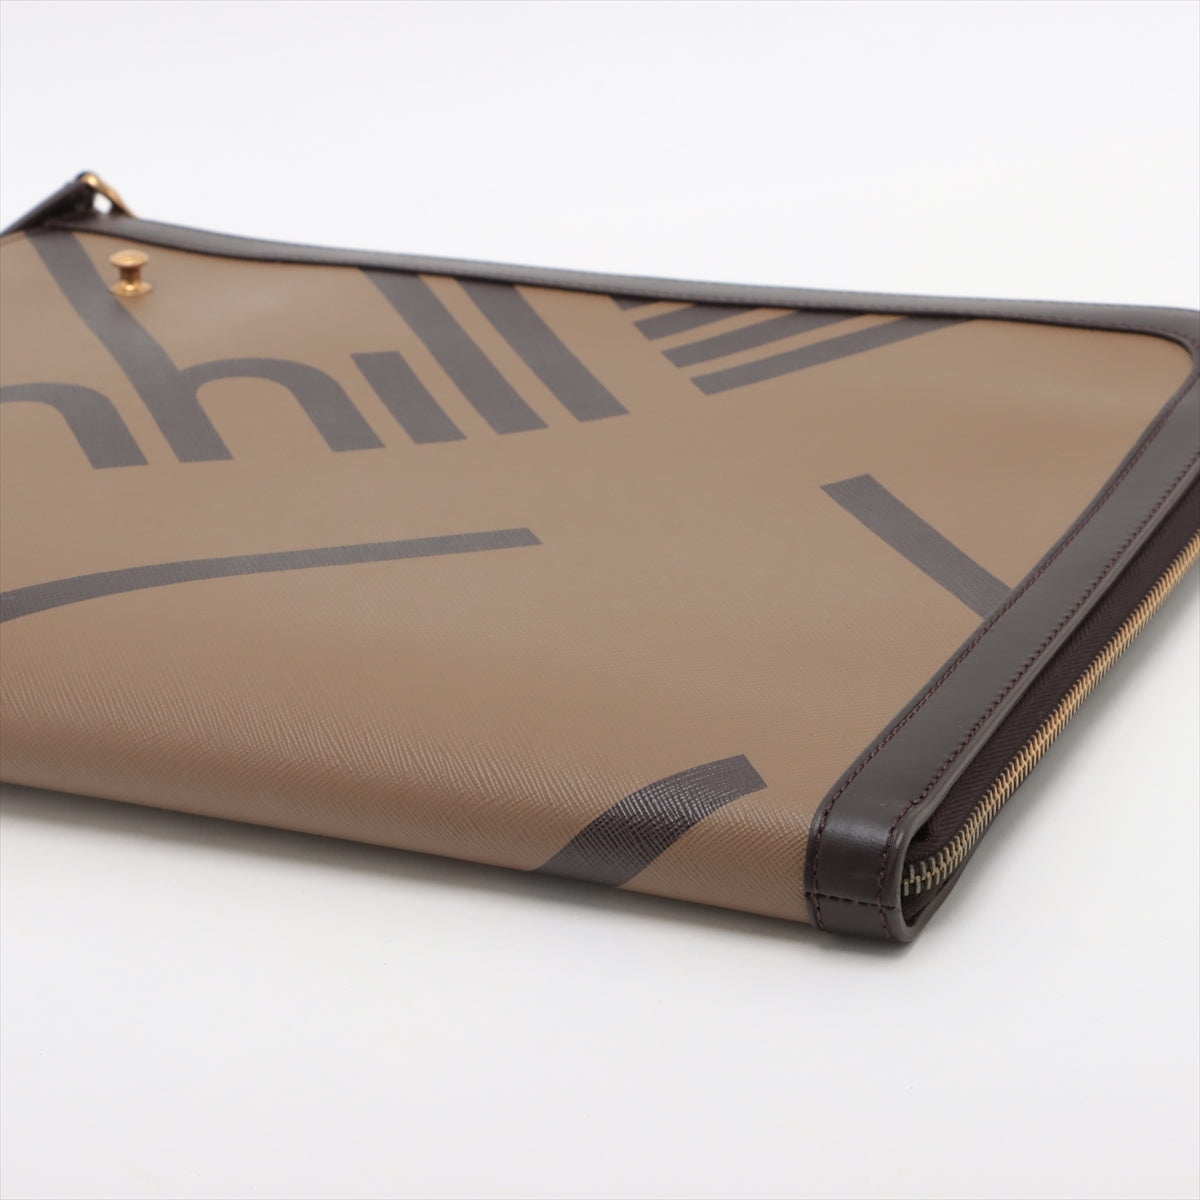 Dunhill PVC & leather Clutch Bag Brown